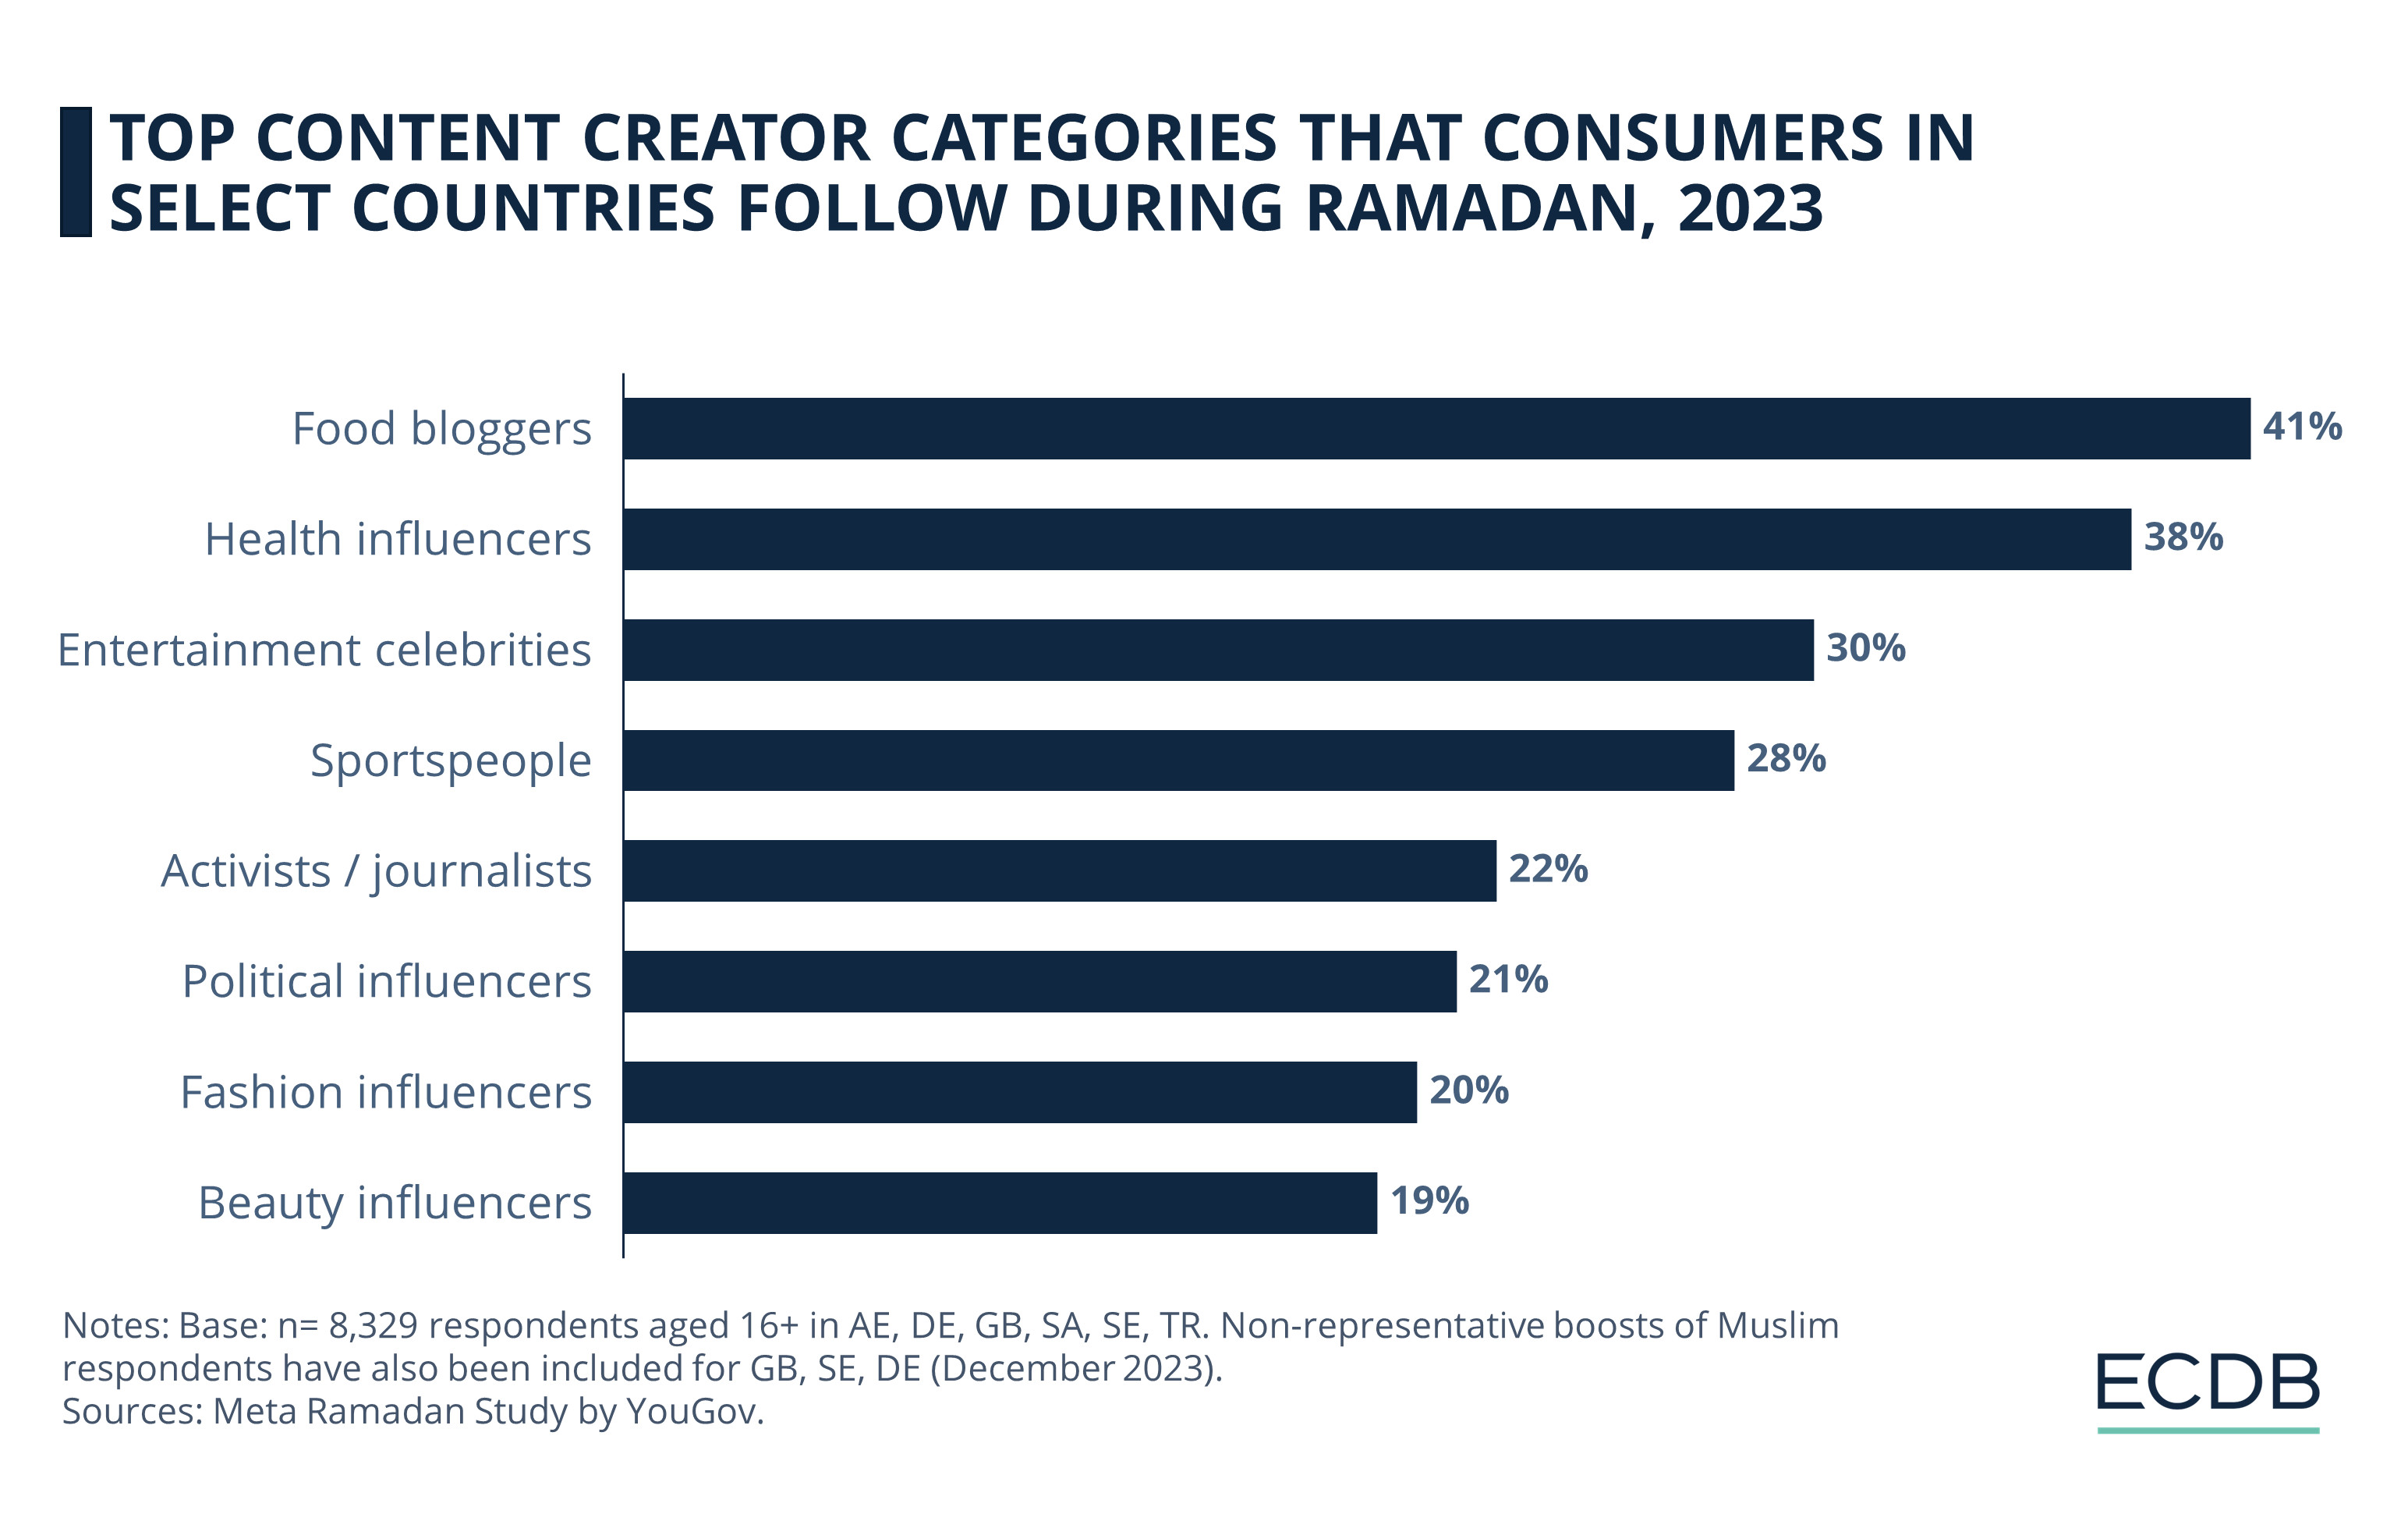 Top Content Creator Categories That Consumers in Select Countries Follow During Ramadan, 2023